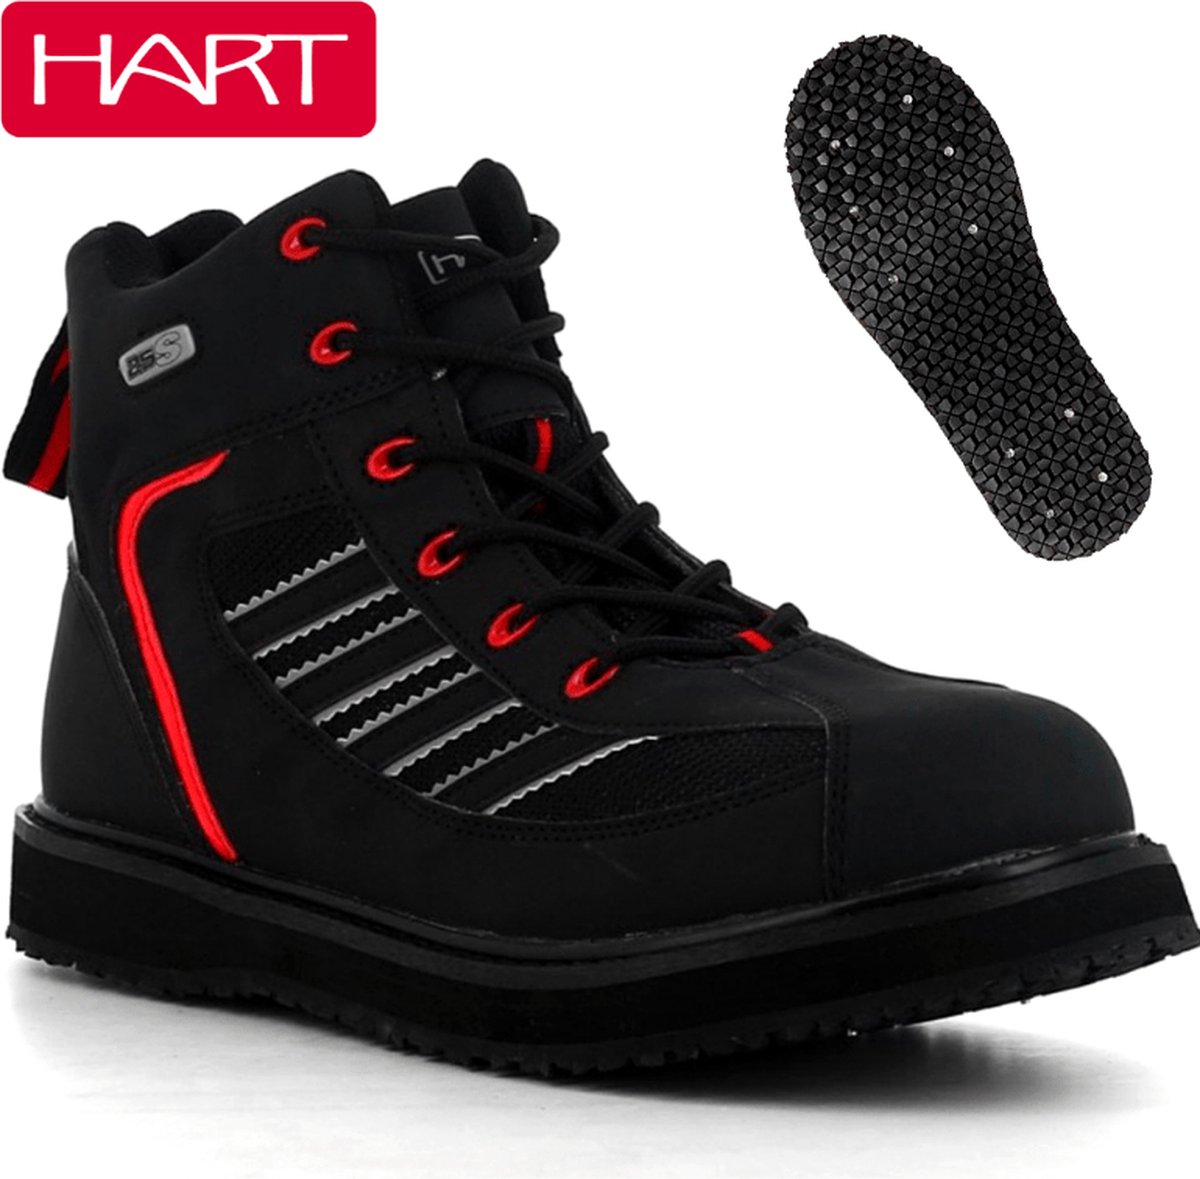 Hart 25s pro wading boots | maat: 42/43